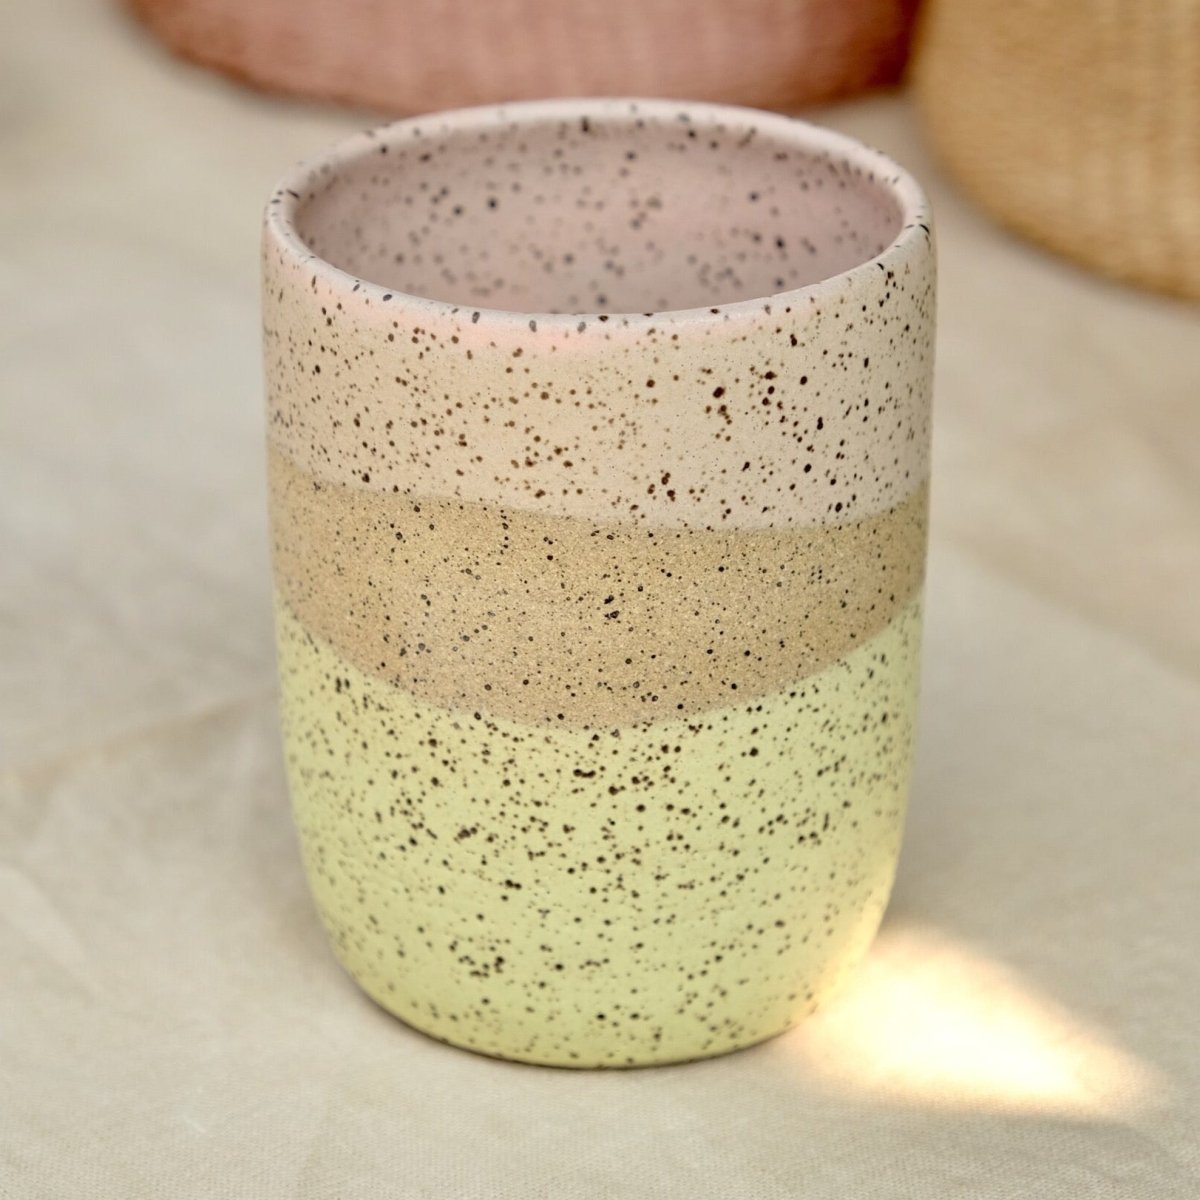 10oz tumbler glazed with matte yellow and pink colors over a speckled clay body. Designed and handmade by Sunflower Studio in Portland, Oregon.